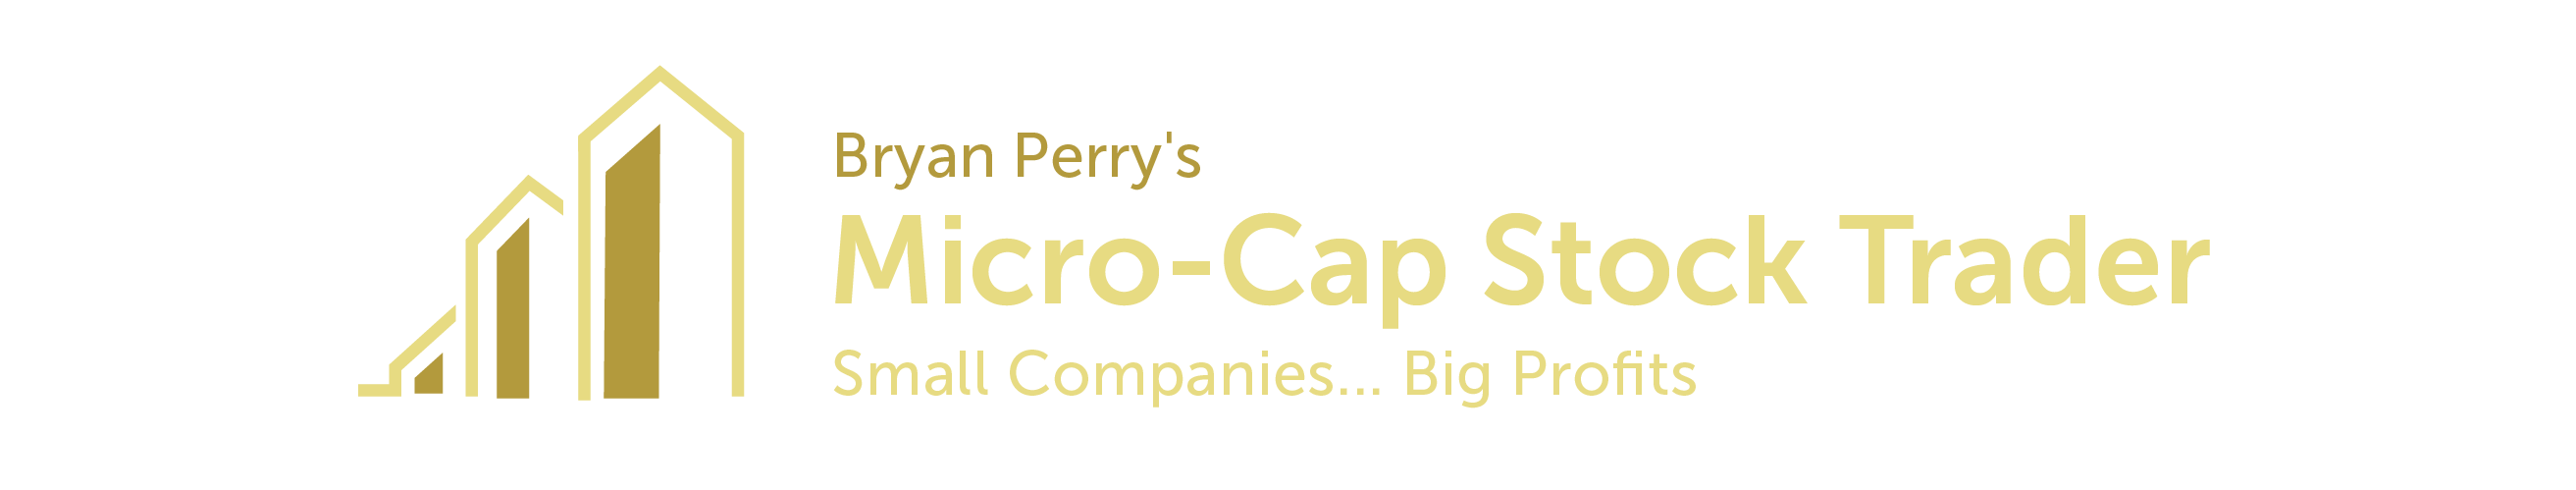 Perry's Micro-Cap Trader